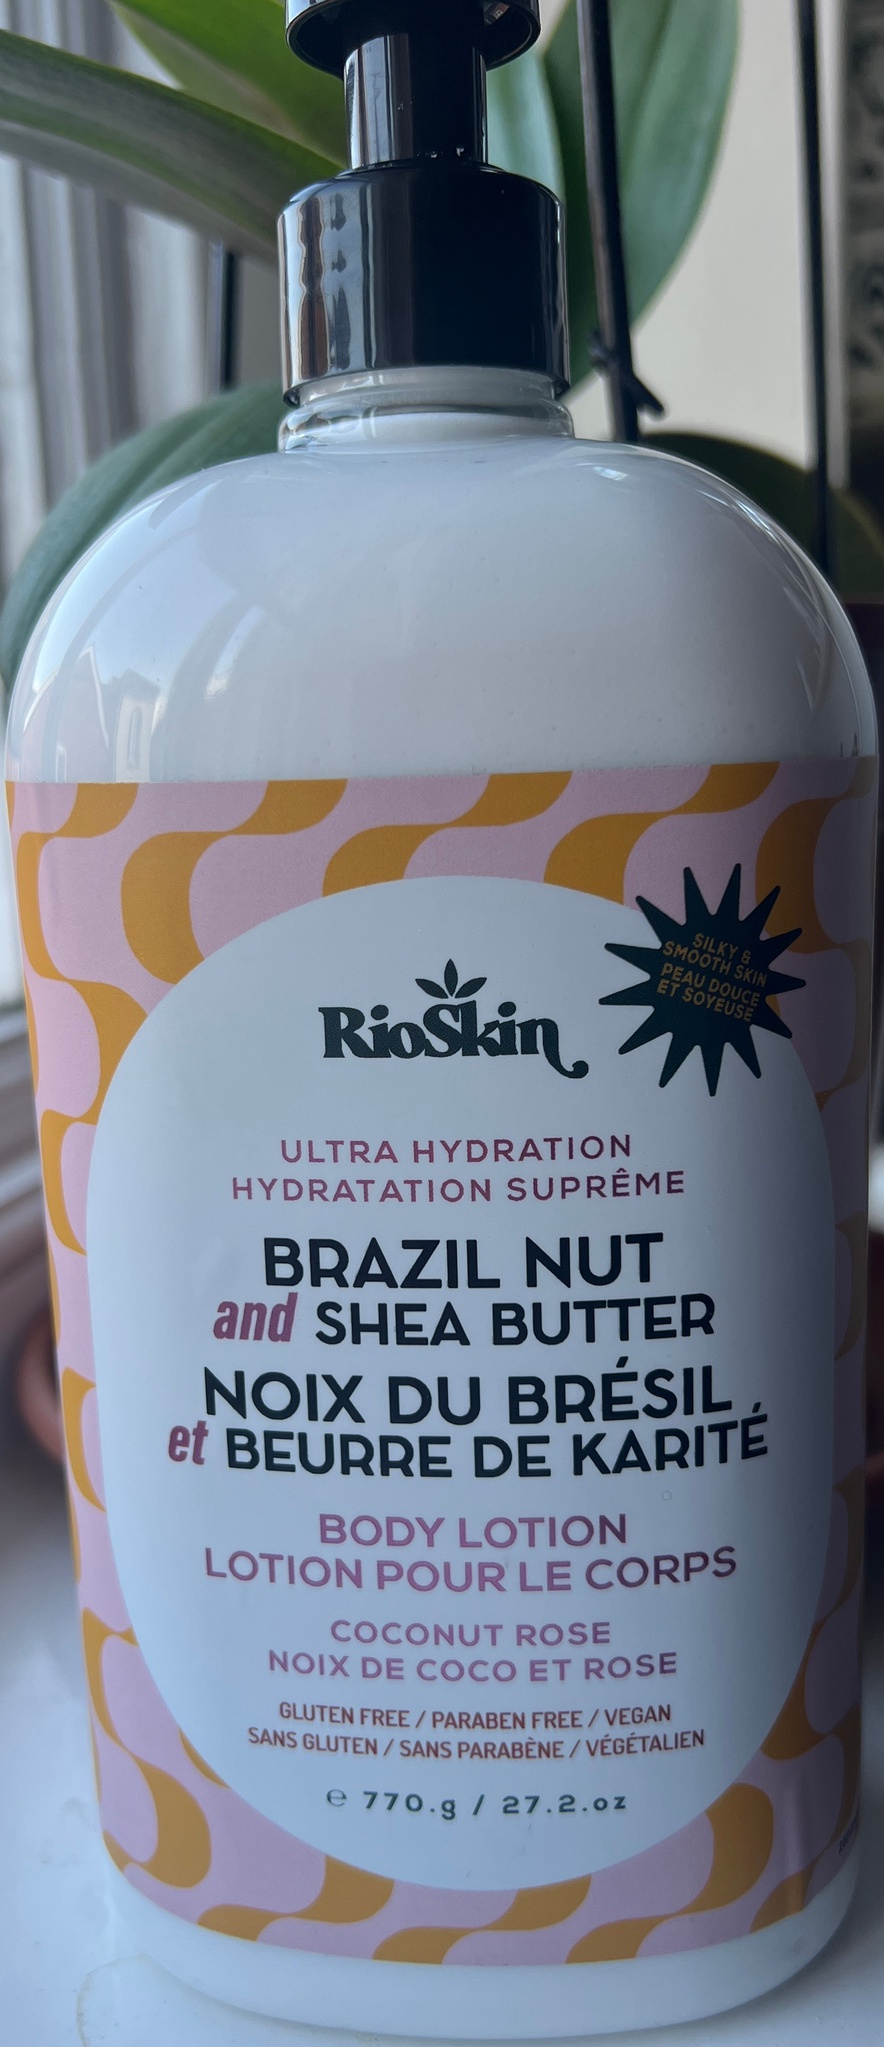 Rio Skin Brazil Nut And Shea Butter Body Lotion